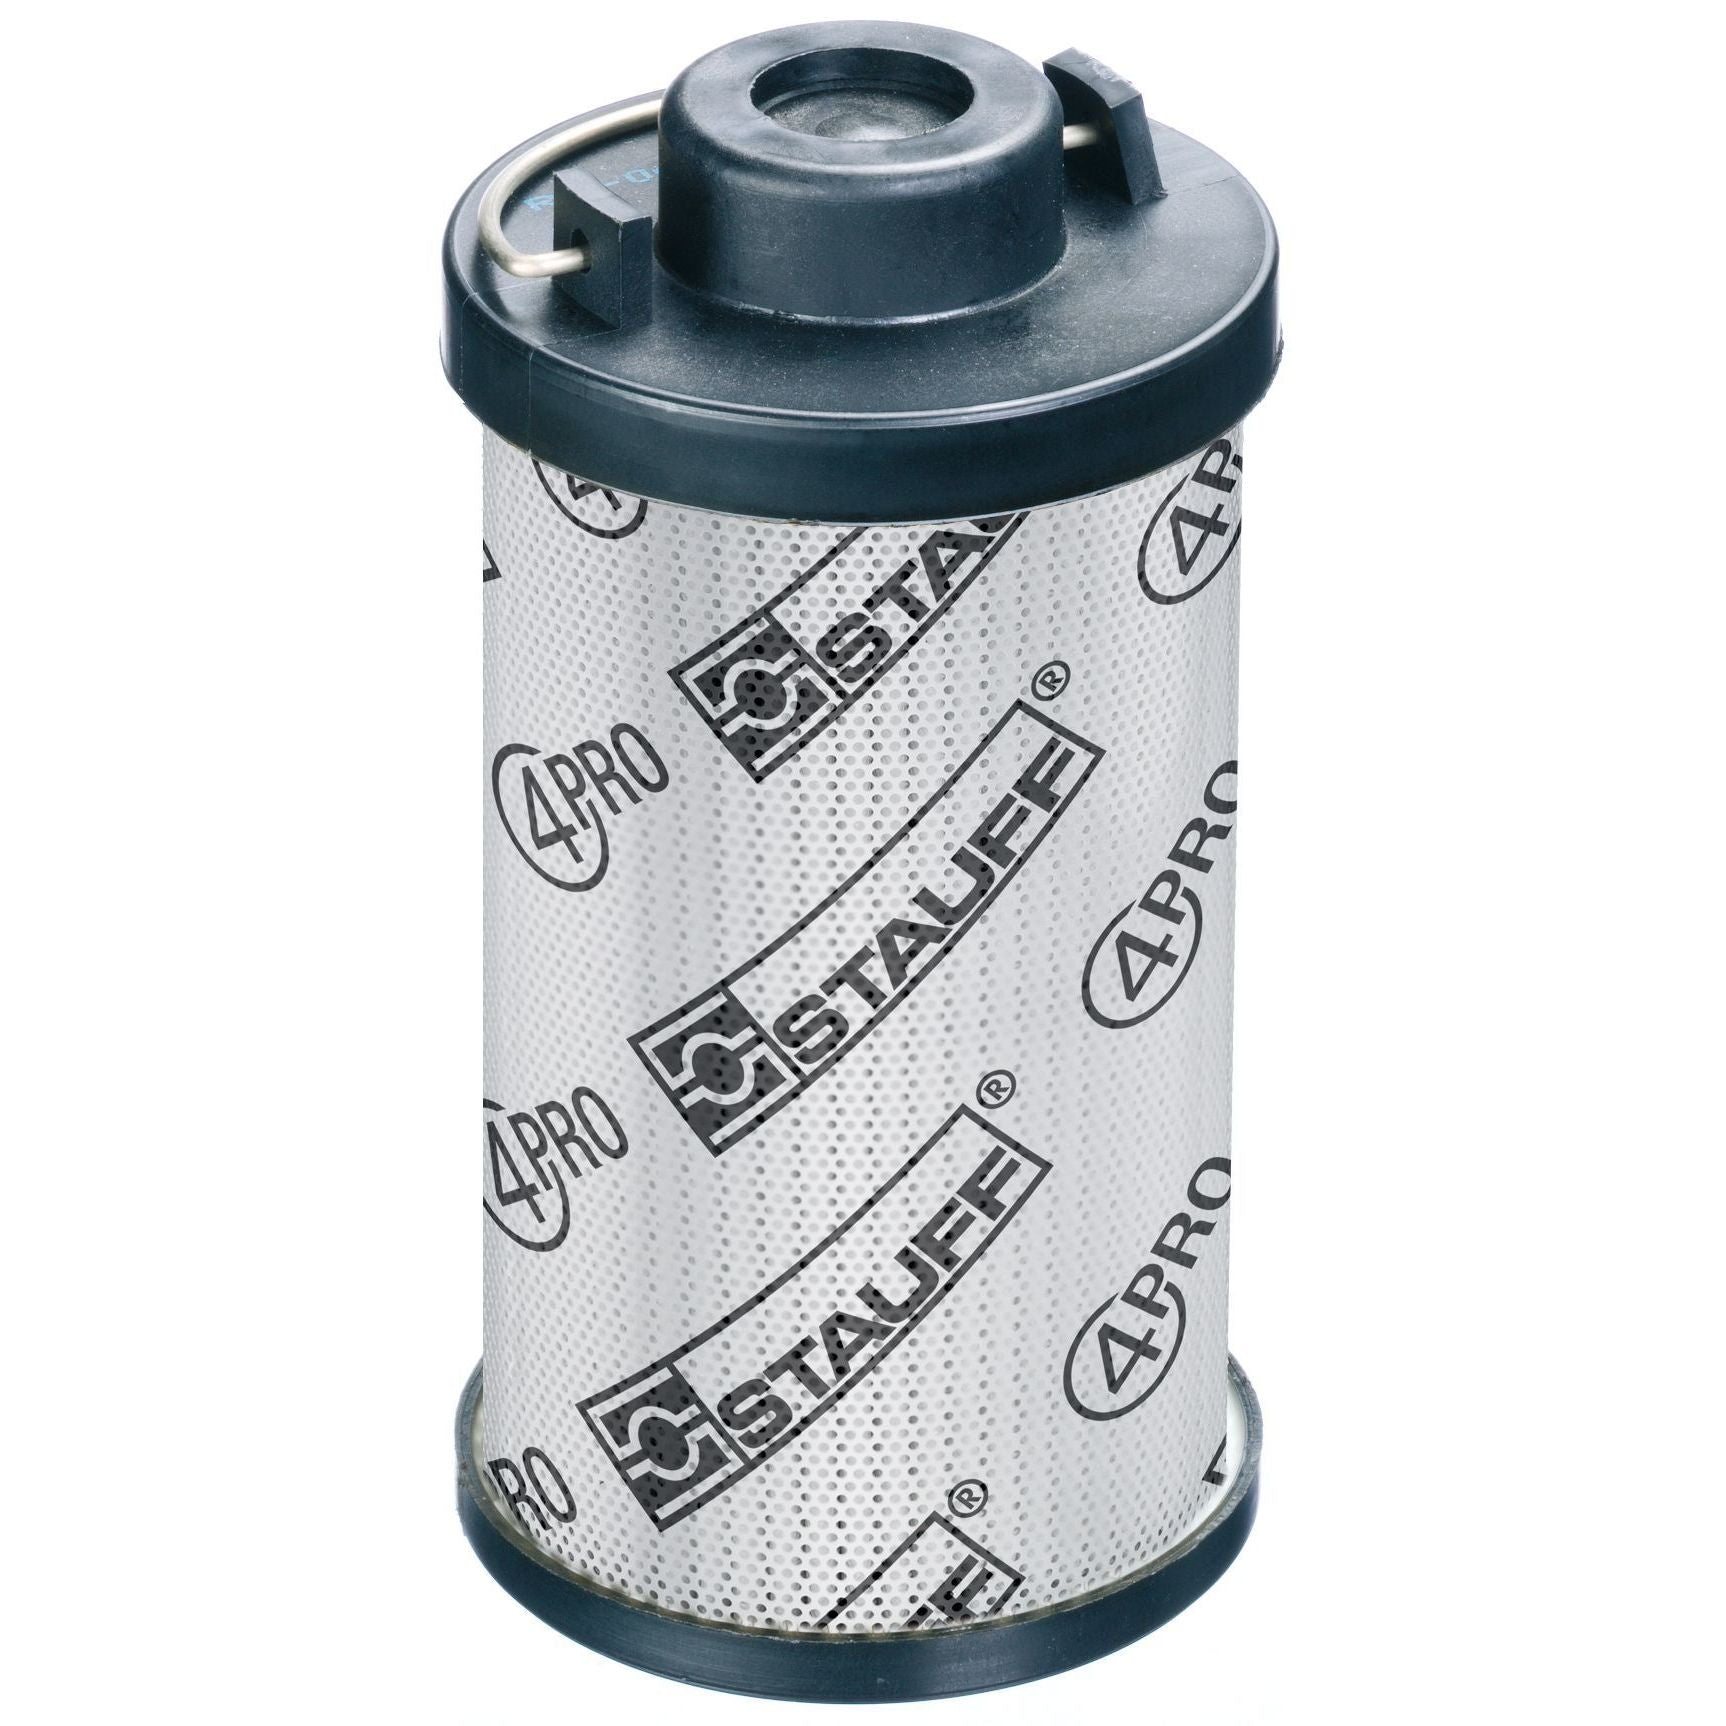 RE-045-G-03-B-B3/4 : Stauff RF-045 Series Filter Element, 3 Micron, Synthetic, 363psi Collapse Differential, Buna